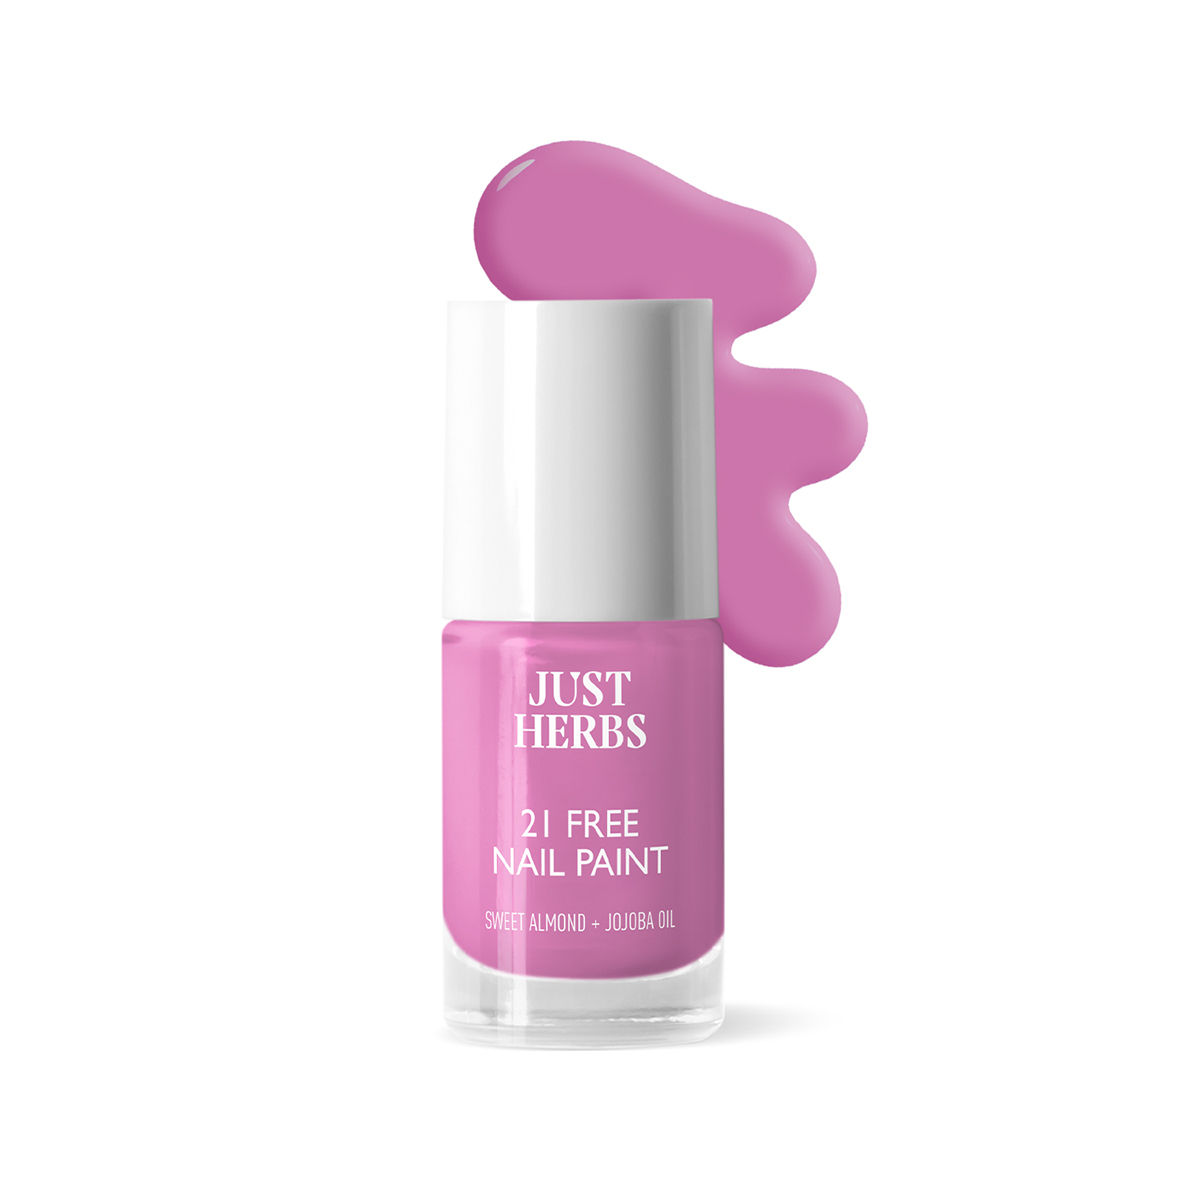 Check Out The Latest Collection Of Purple Nail Polishes From ILMP